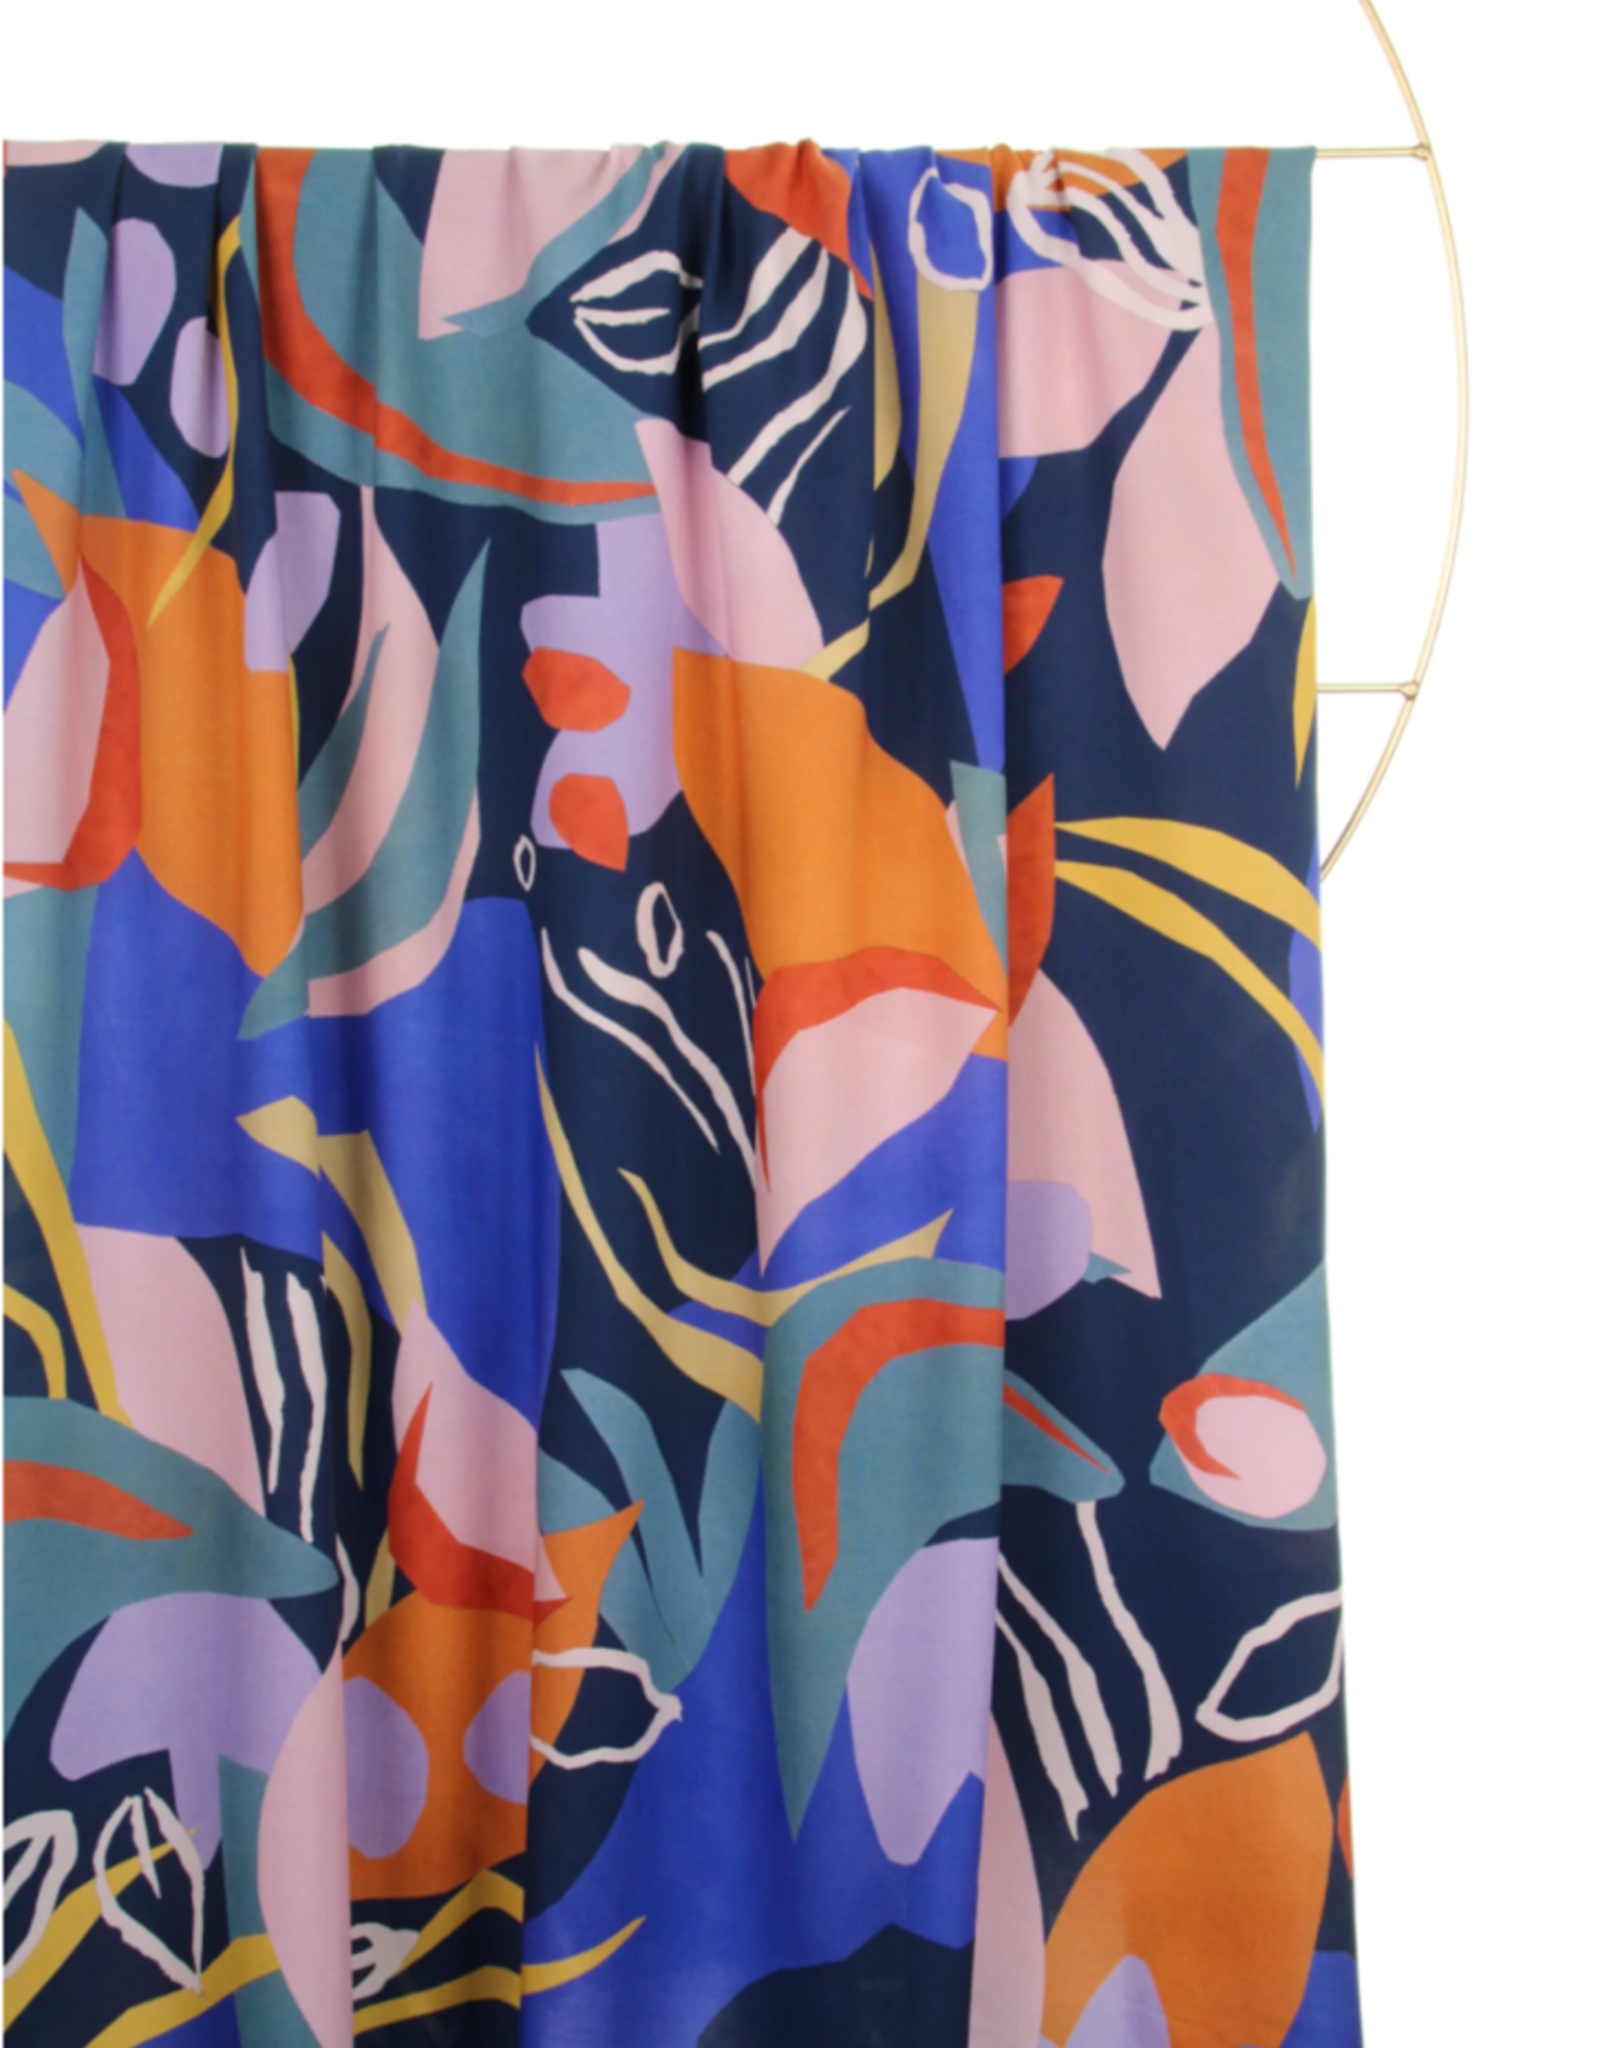 Atelier Jupe Atelier Jupe - Abstract Print VISCOSE